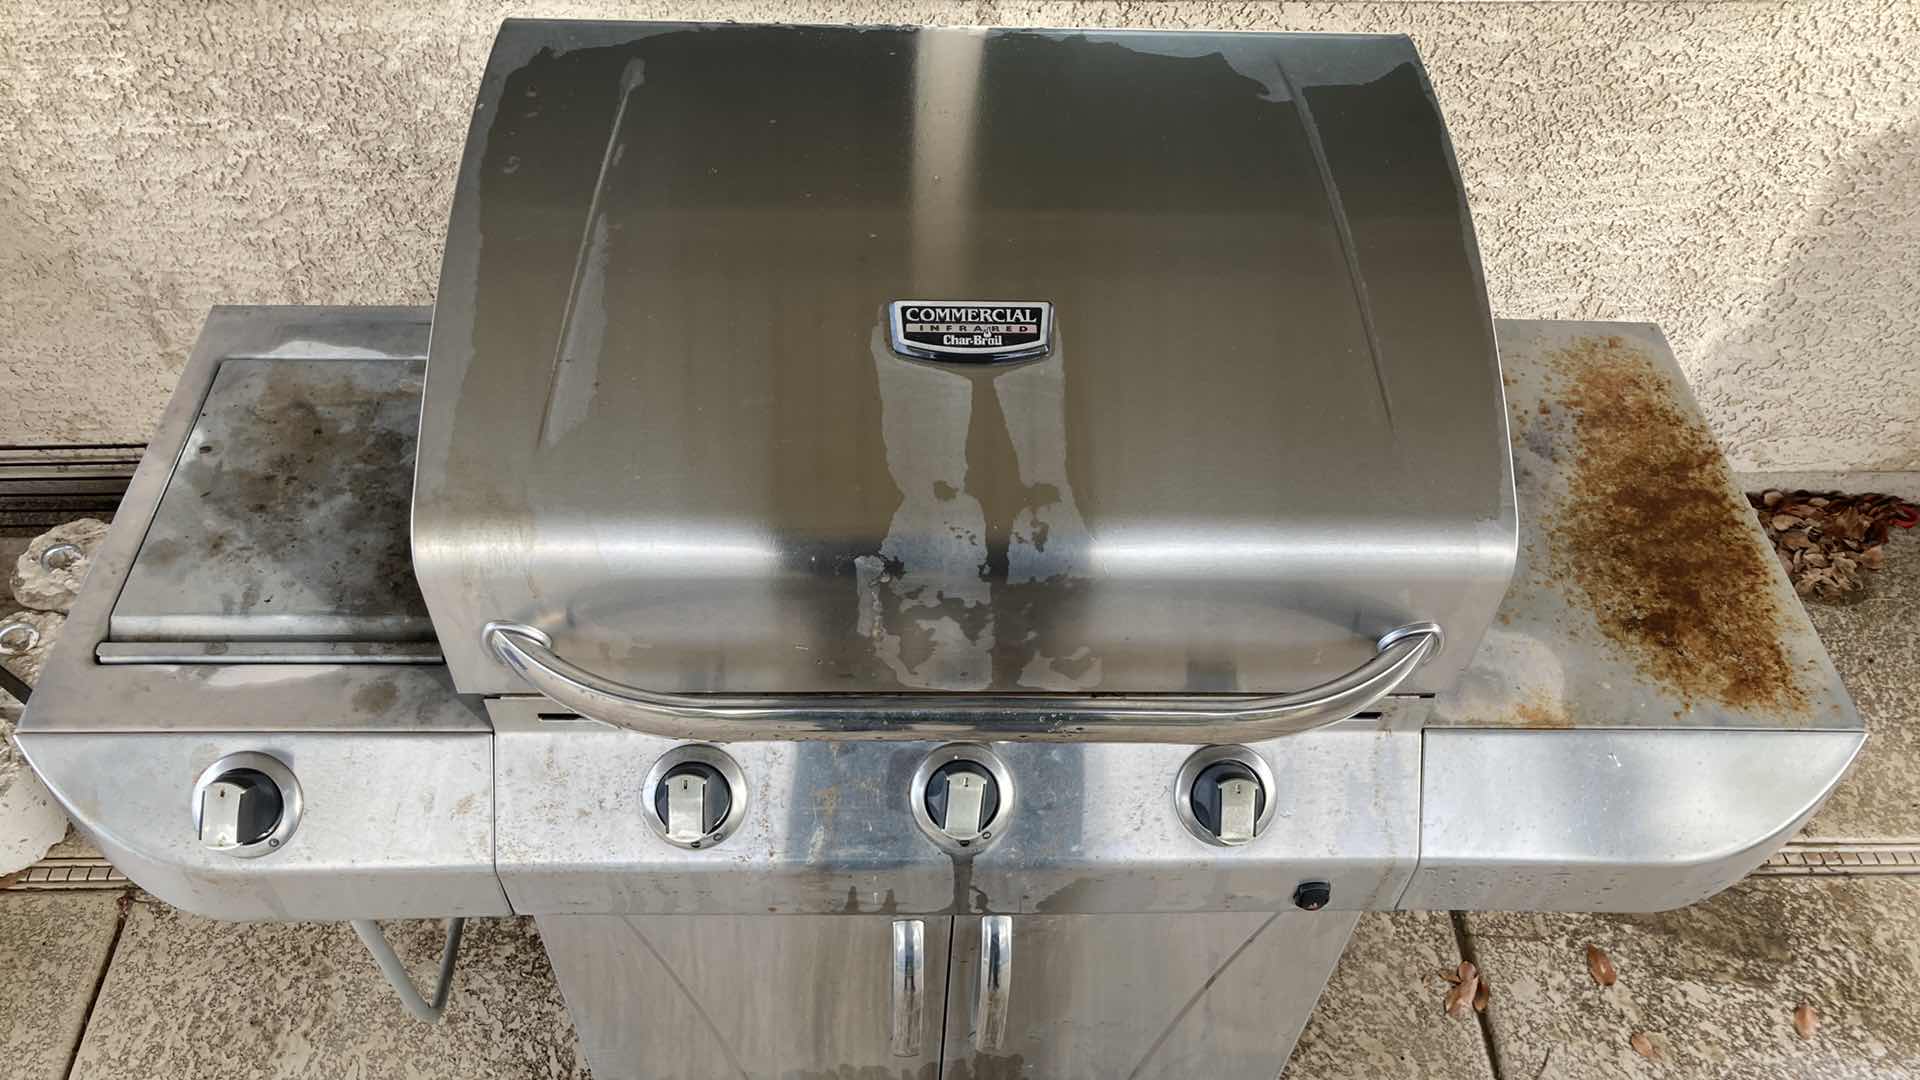 Photo 4 of CHARBROIL COMMERCIAL INFRARED PROPANE GRILL MODEL 463257111 W PROPANE TANK (PARTIALLY FULL)